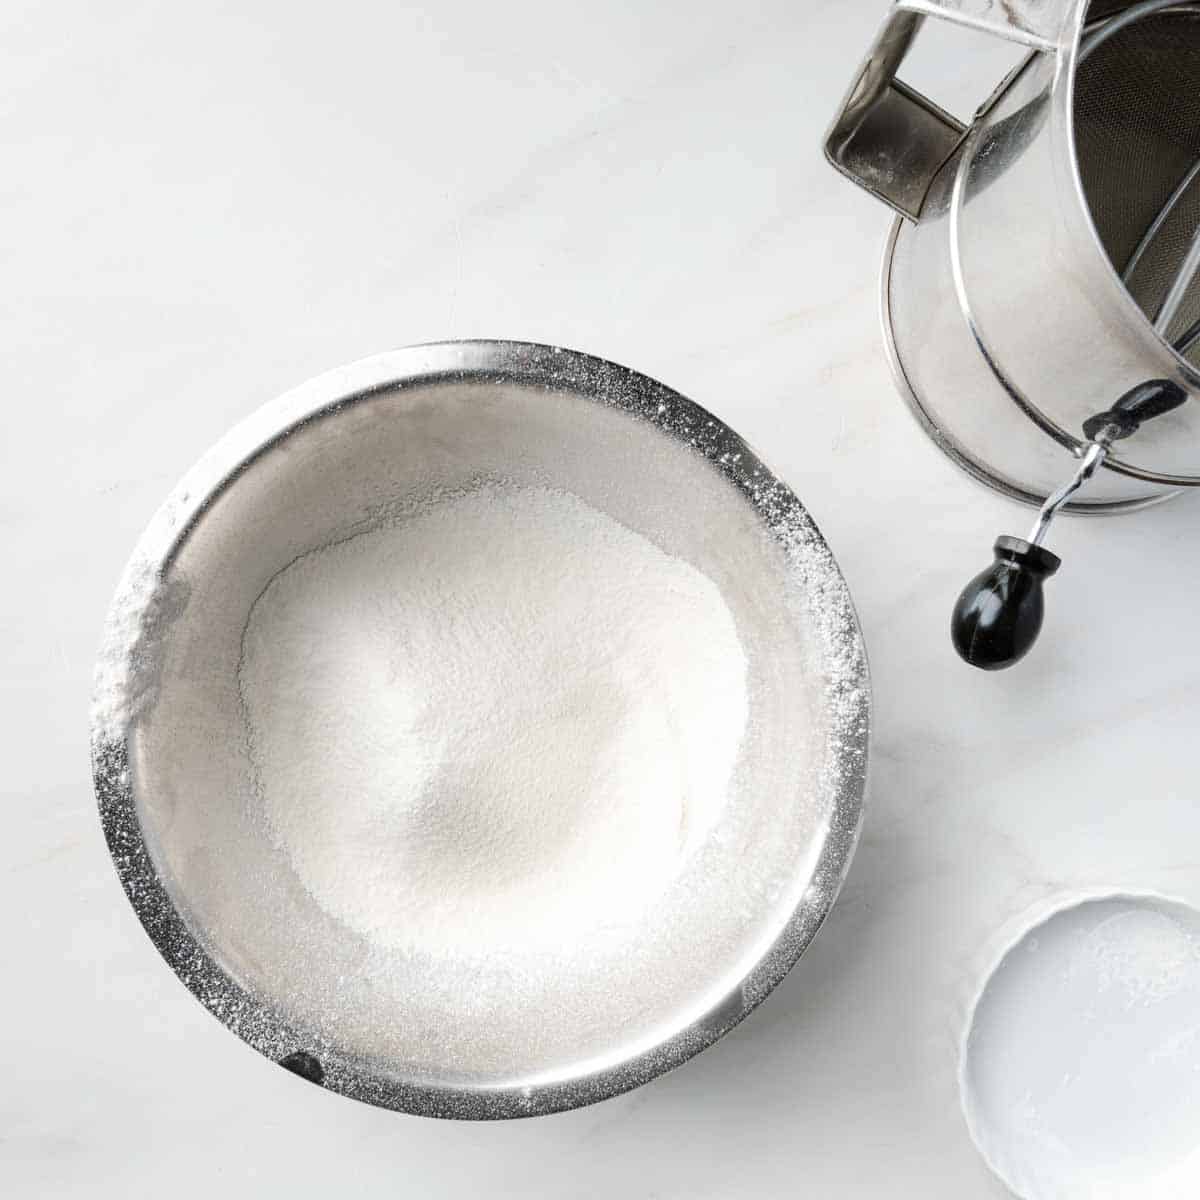 Sifted flour, cornstarch, baking powder and salt in a bowl.